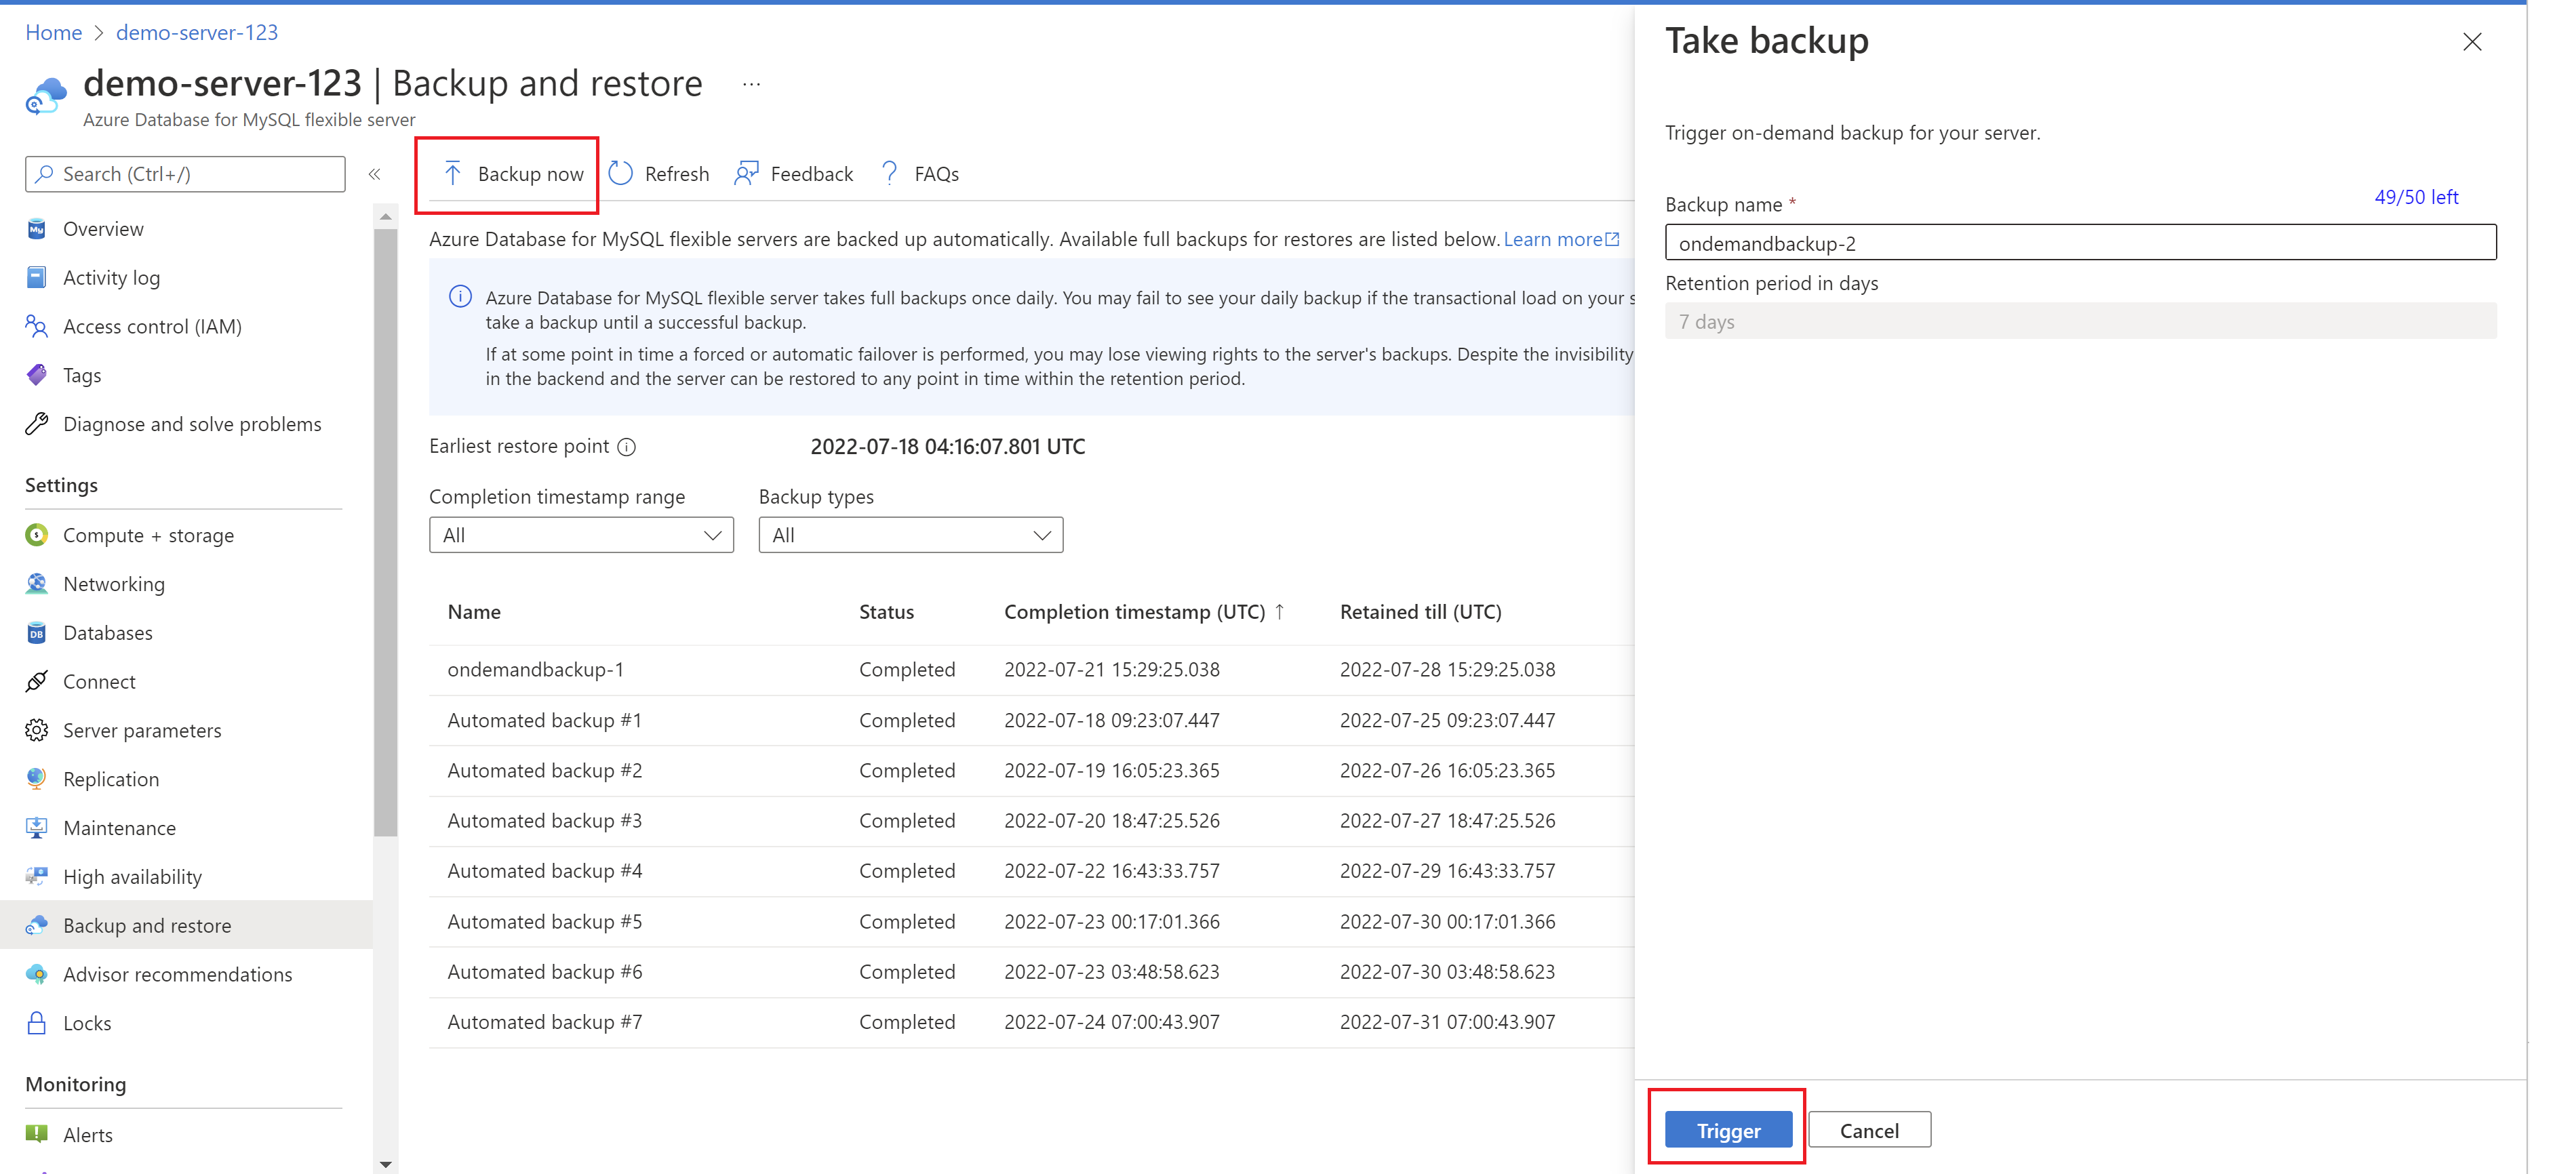 Screenshot showing how to trigger On-demand backup.